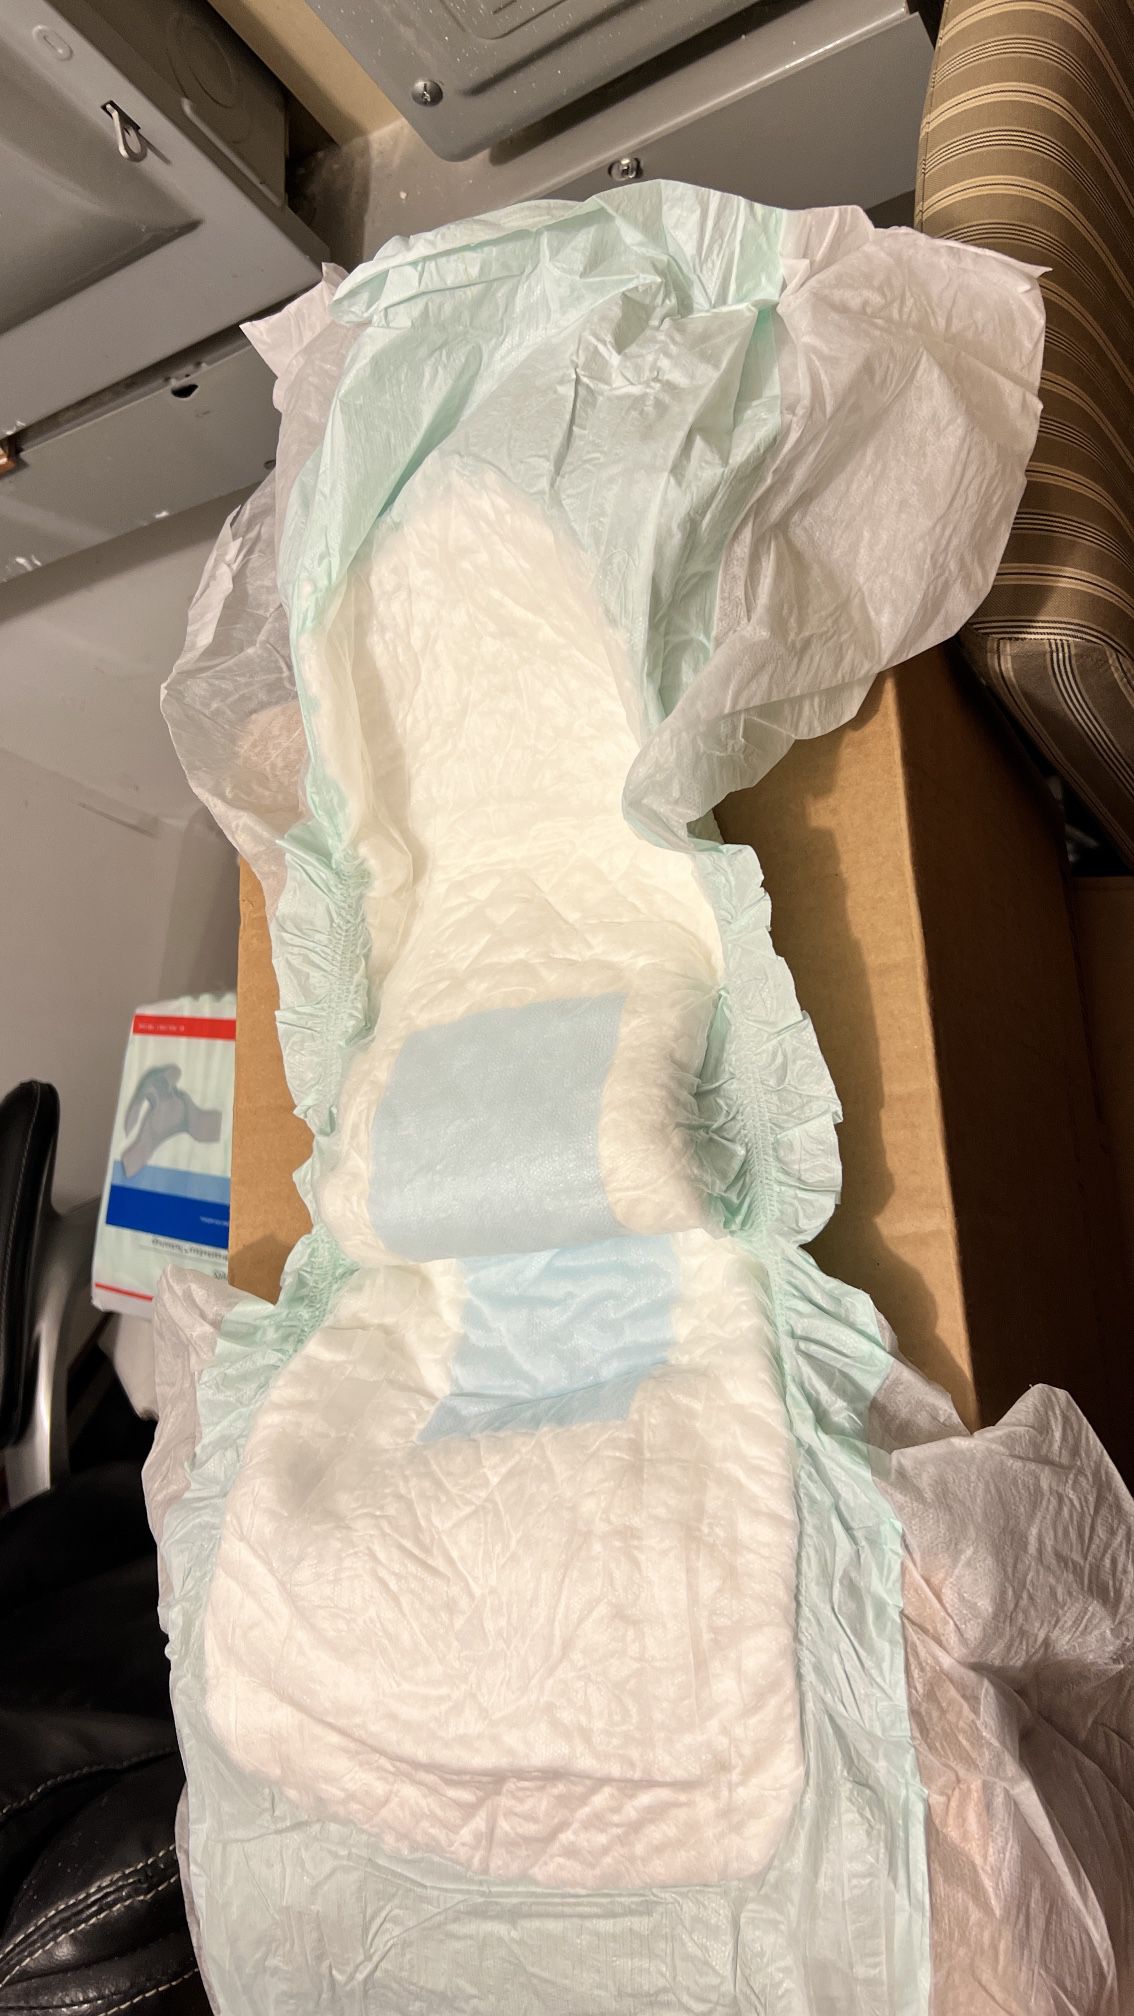 Adult Unisex Diapers 2xl for Sale in Queens, NY - OfferUp